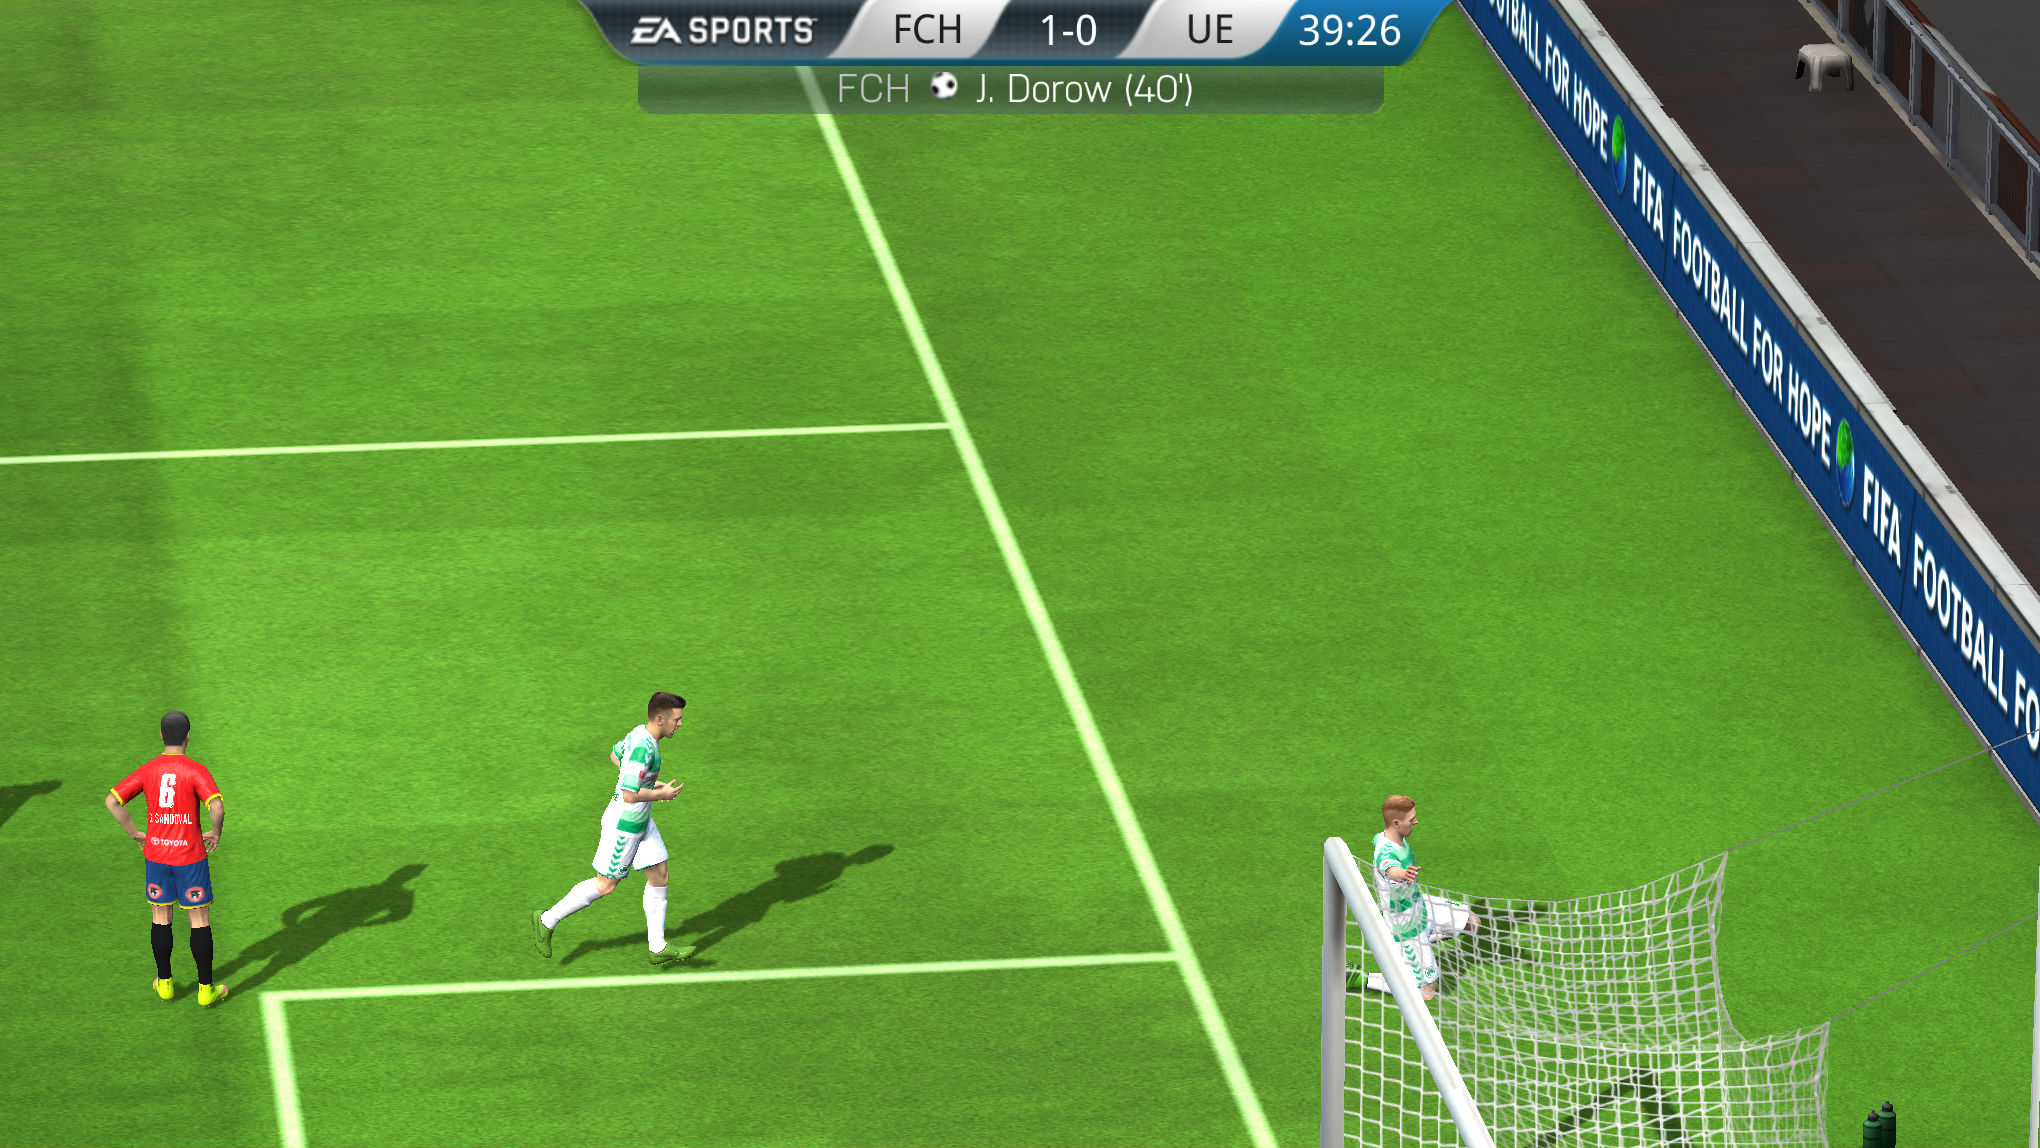 FIFA 16 — StrategyWiki  Strategy guide and game reference wiki